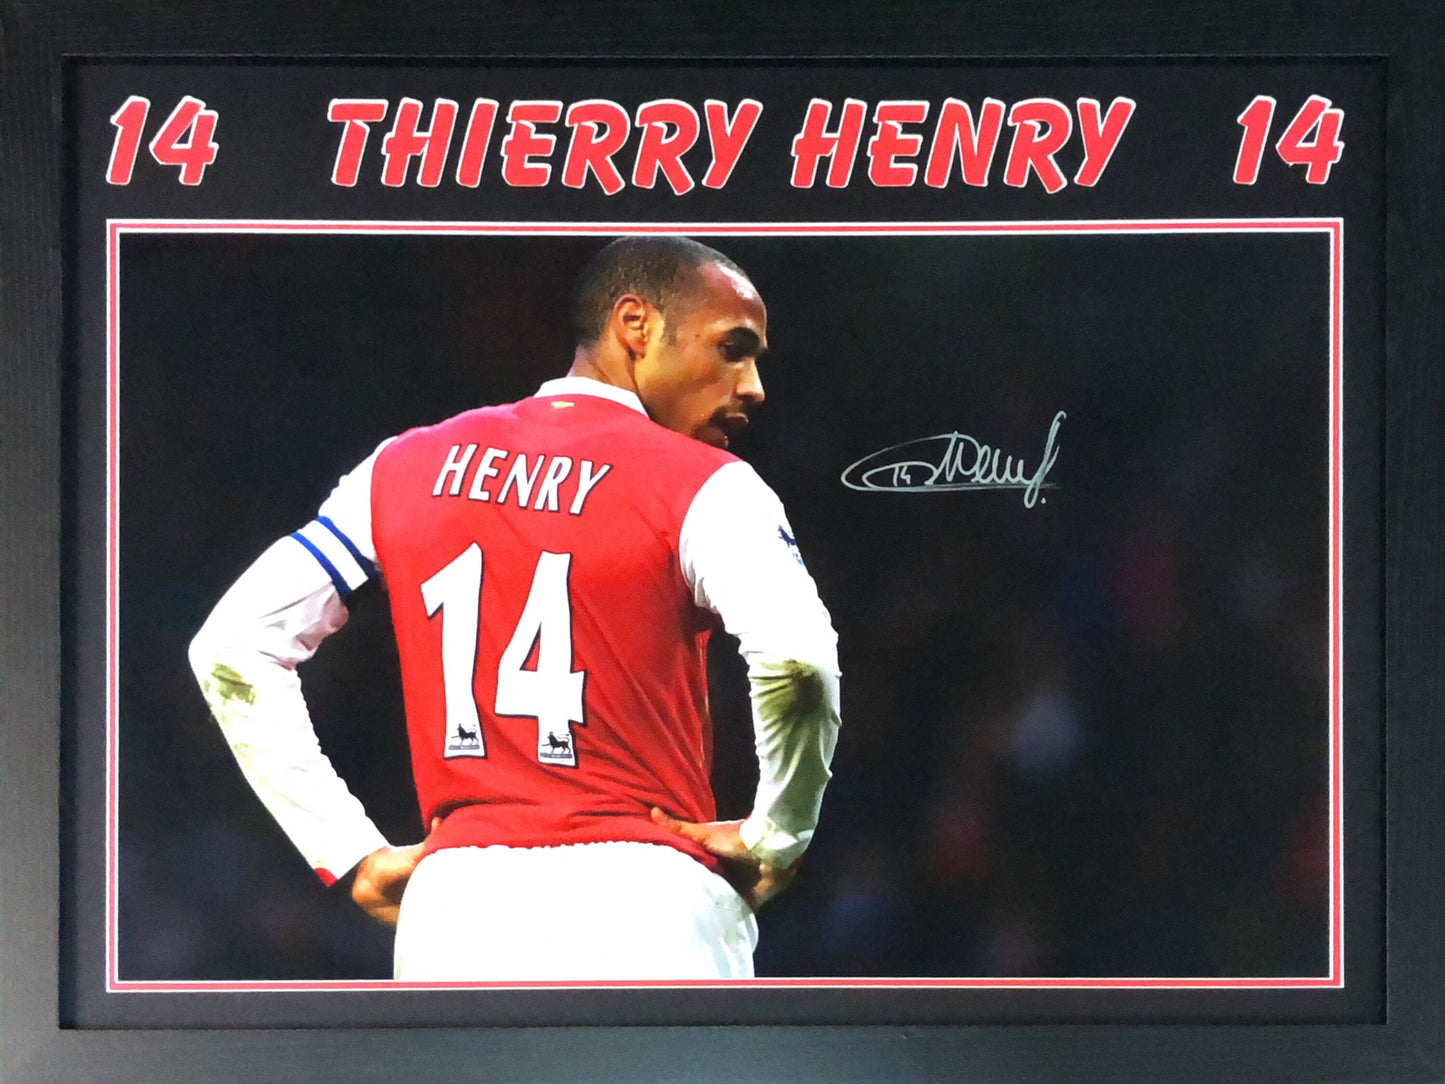 Thierry Henry Signed Photo - Framed